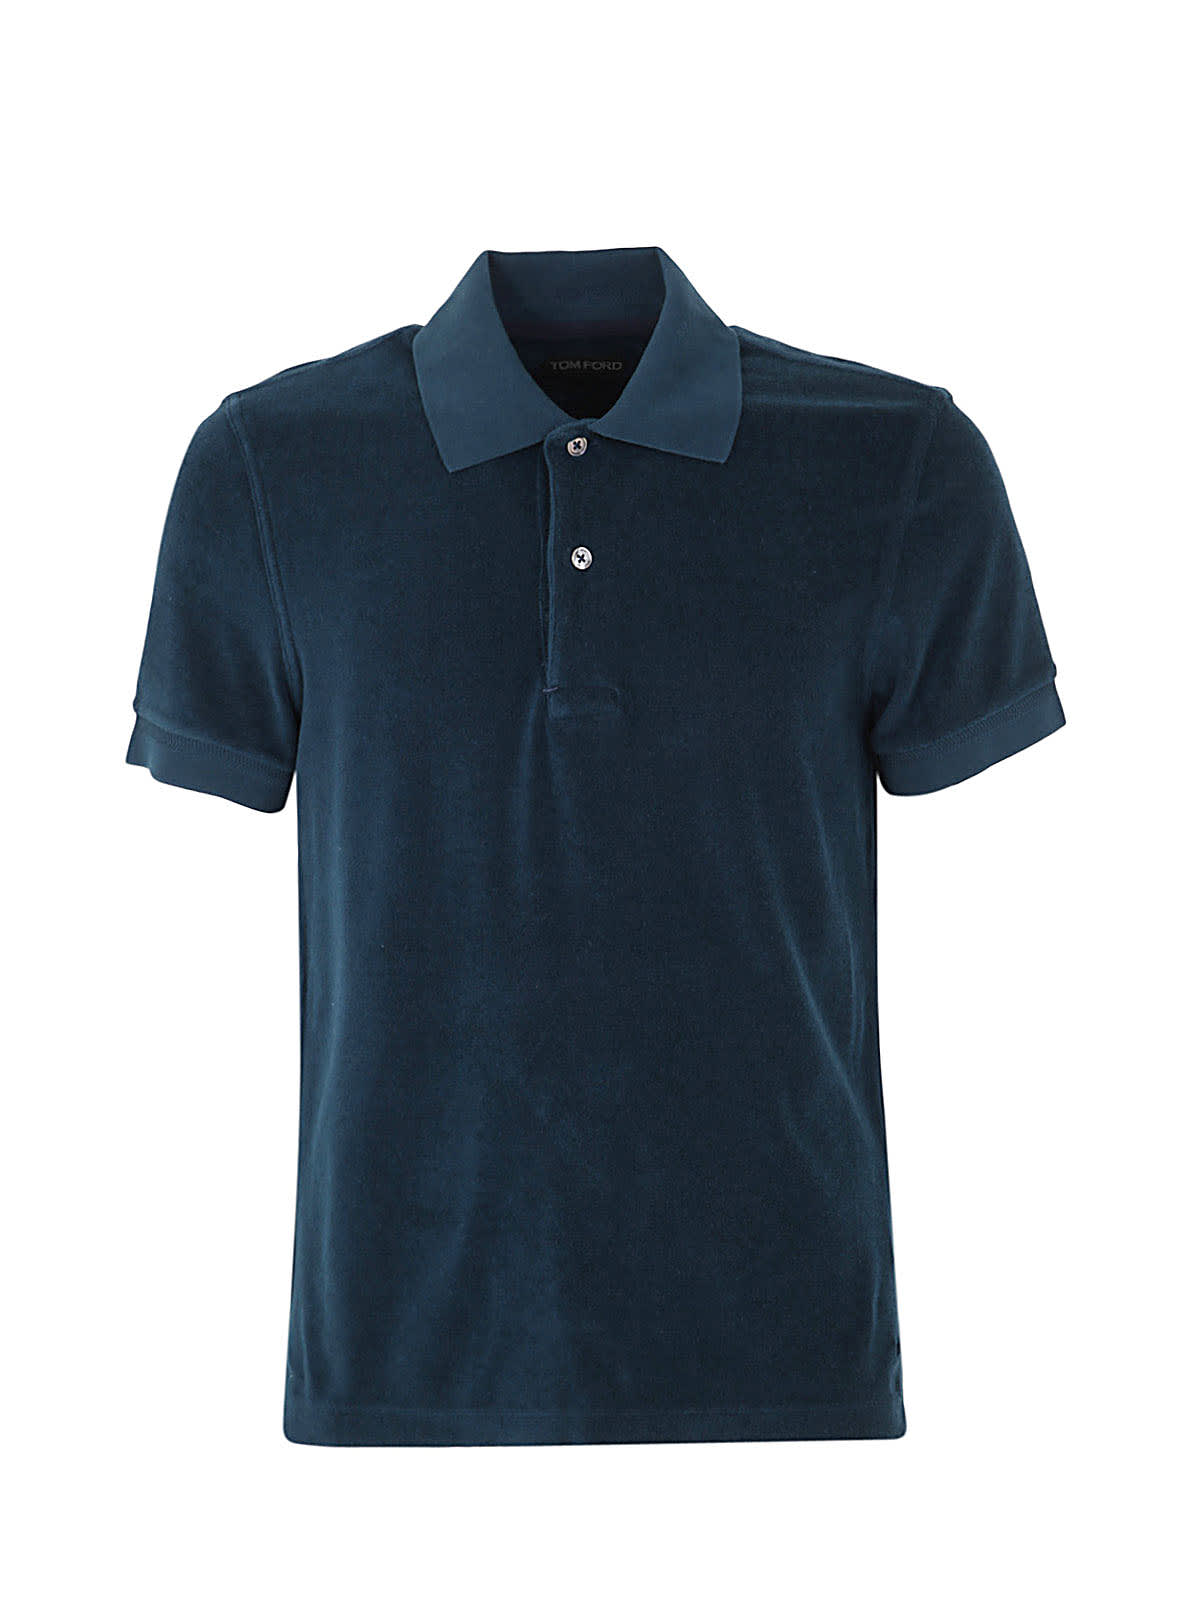 TOM FORD SHORT SLEEVE JERSEY POLO